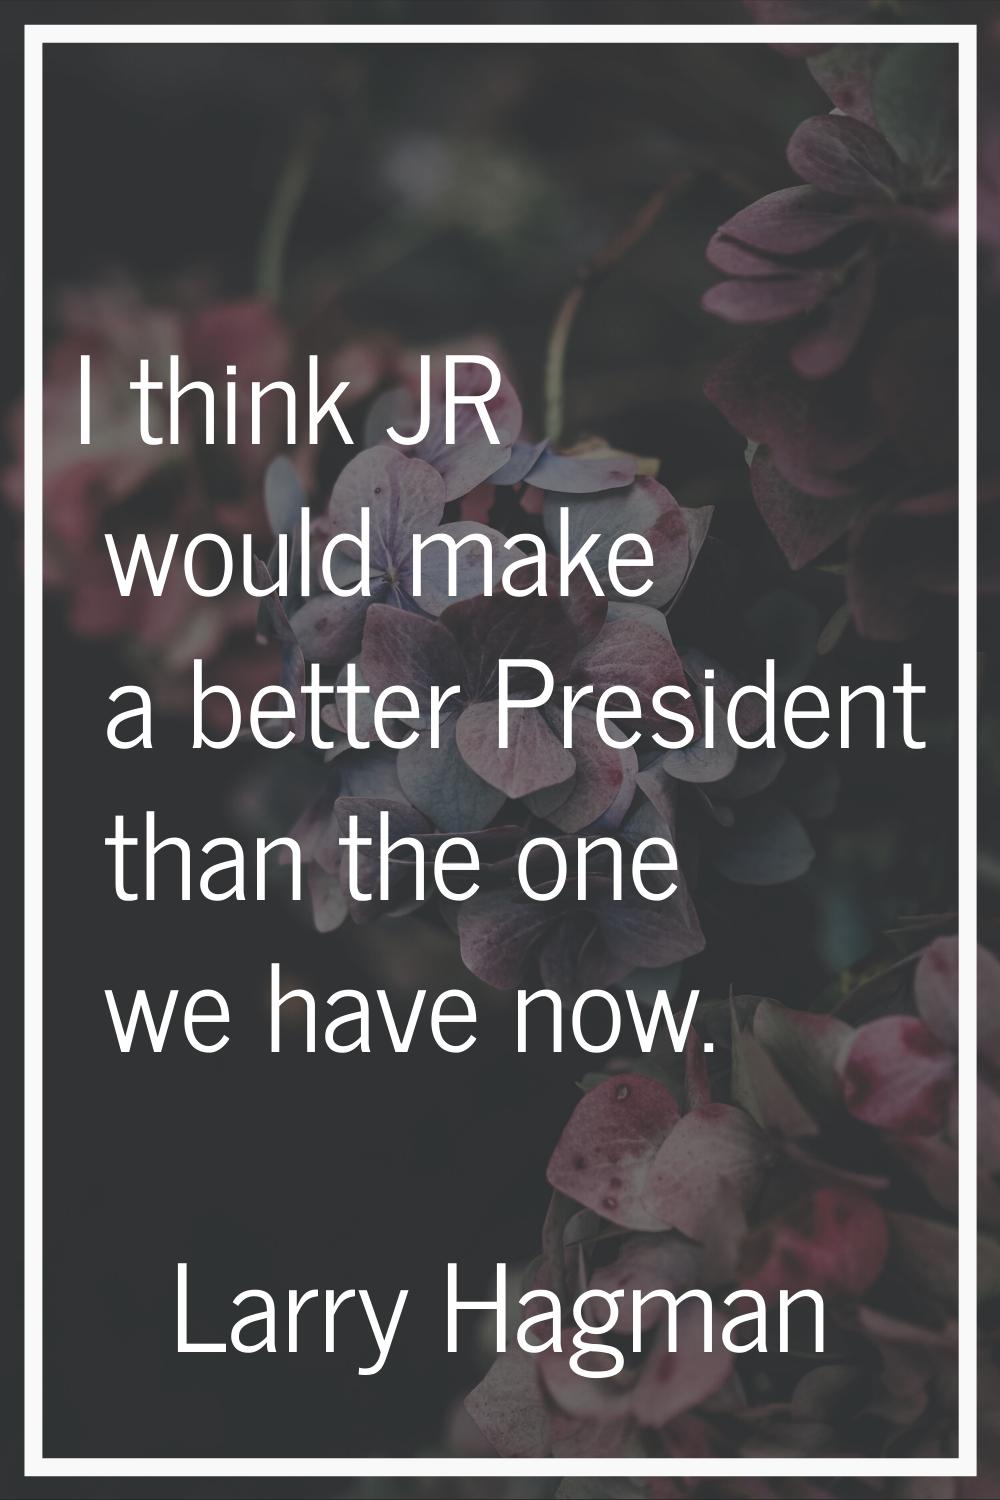 I think JR would make a better President than the one we have now.